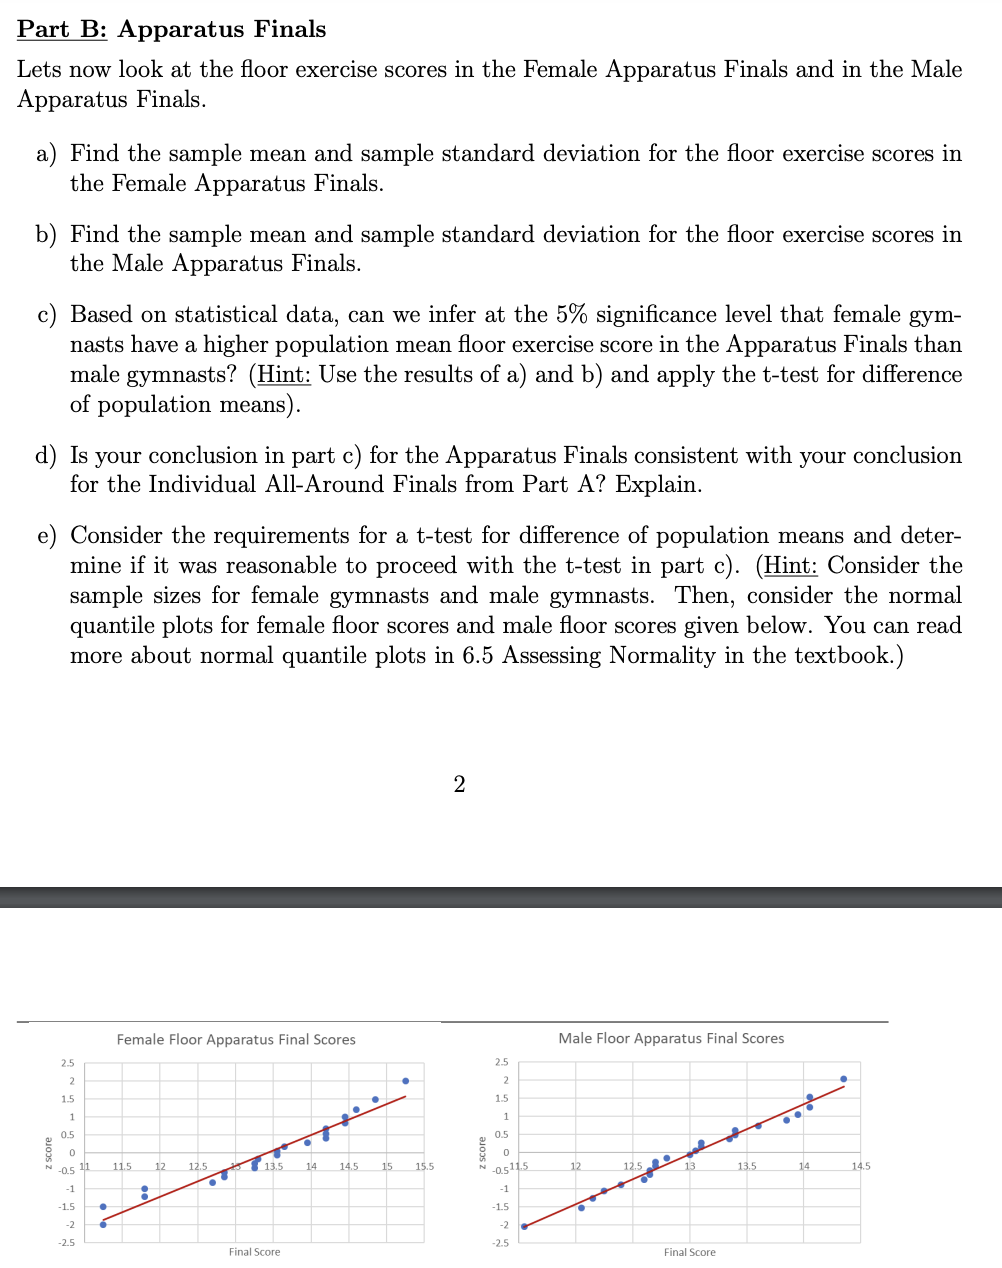 Part B: Apparatus Finals
Lets now look at the floor exercise scores in the Female Apparatus Finals and in the Male
Apparatus Finals.
a) Find the sample mean and sample standard deviation for the floor exercise scores in
the Female Apparatus Finals.
b) Find the sample mean and sample standard deviation for the floor exercise scores in
the Male Apparatus Finals.
c) Based on statistical data, can we infer at the 5% significance level that female gym-
nasts have a higher population mean floor exercise score in the Apparatus Finals than
male gymnasts? (Hint: Use the results of a) and b) and apply the t-test for difference
of population means).
d) Is your conclusion in part c) for the Apparatus Finals consistent with your conclusion
for the Individual All-Around Finals from Part A? Explain.
e) Consider the requirements for a t-test for difference of population means and deter-
mine if it was reasonable to proceed with the t-test in part c). (Hint: Consider the
sample sizes for female gymnasts and male gymnasts. Then, consider the normal
quantile plots for female floor scores and male floor scores given below. You can read
more about normal quantile plots in 6.5 Assessing Normality in the textbook.)
2.5
2
1.5
1
0.5
0
-0.5 11
-1
-1.5
-2
-2.5
●
Female Floor Apparatus Final Scores
11.5 12
:
12.5
●
13.5 14 14.5
Final Score
15
15.5
2
2.5
2
1.5
1
0.5
0
-0.511.5
-1
-1.5
-2
-2.5
Male Floor Apparatus Final Scores
12
12.5
13
Final Score
13.5
..
14
14.5